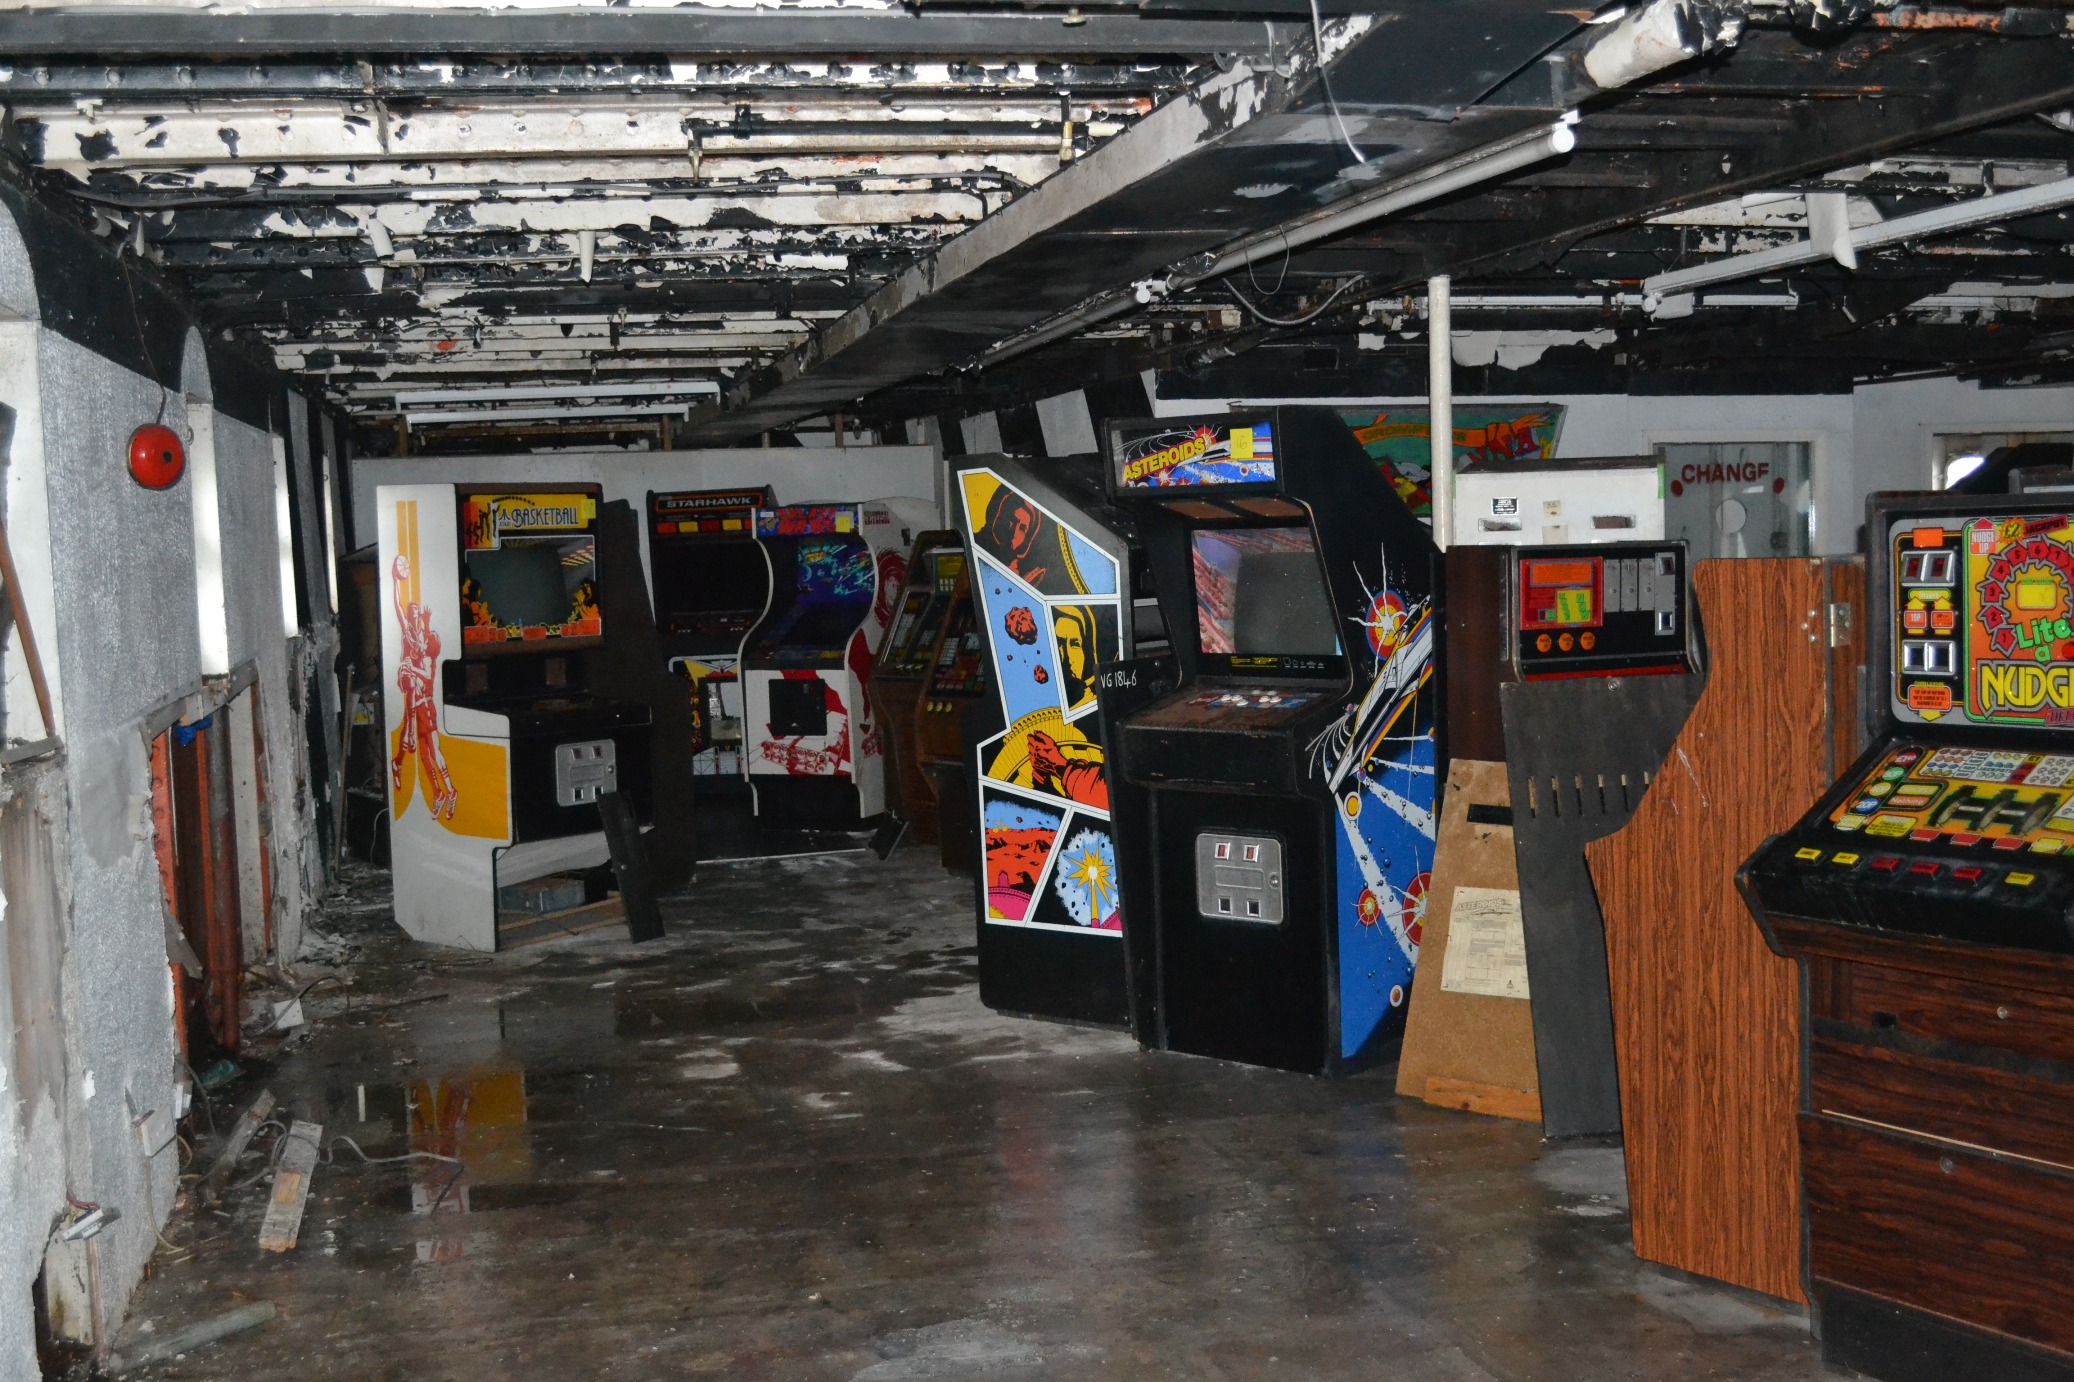 Explorers Uncover Classic Arcade Games On Abandoned Ship